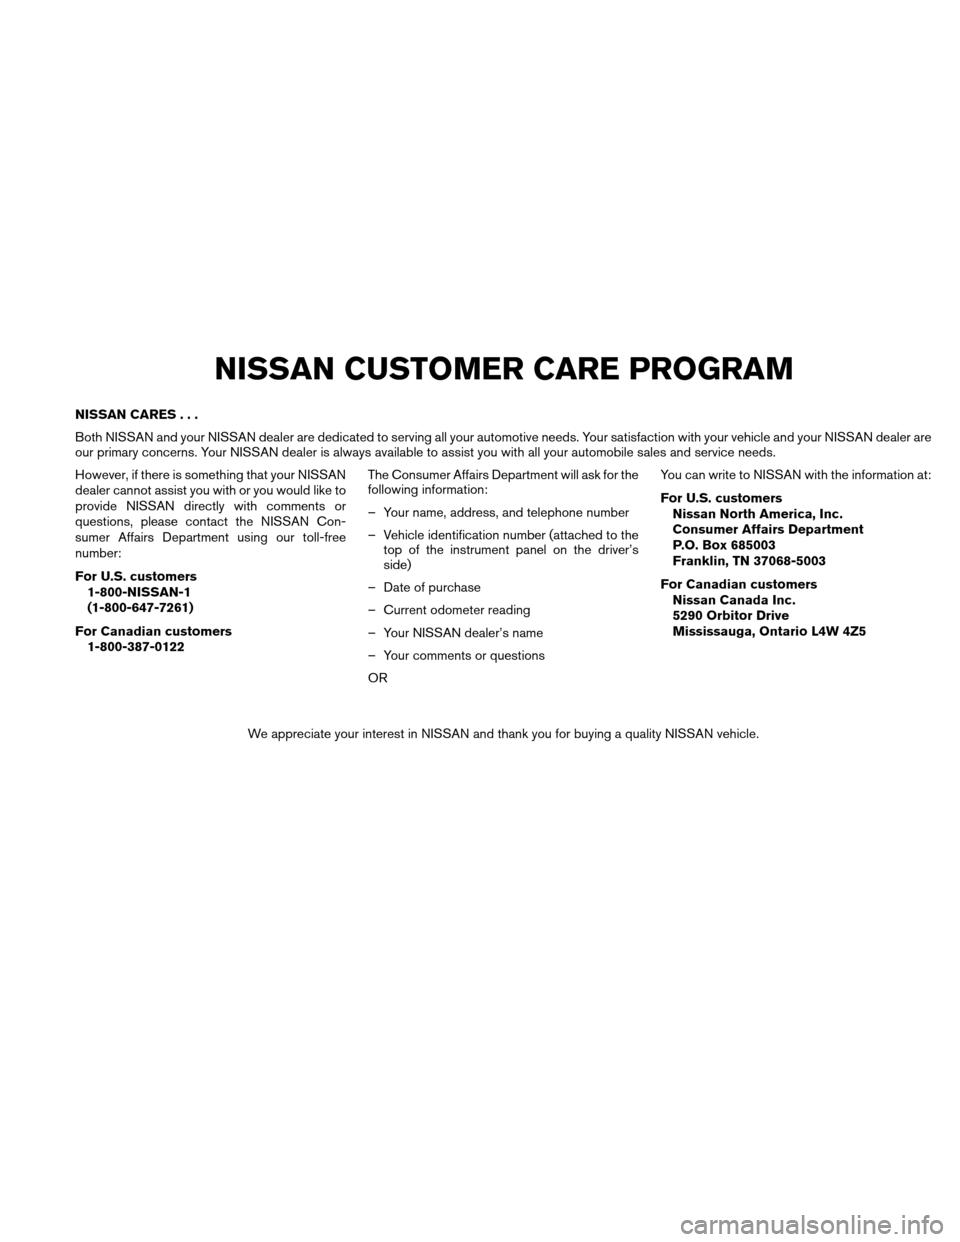 NISSAN ALTIMA COUPE 2010 D32 / 4.G Owners Manual NISSAN CARES...
Both NISSAN and your NISSAN dealer are dedicated to serving all your automotive needs. Your satisfaction with your vehicle and your NISSAN dealer are
our primary concerns. Your NISSAN 